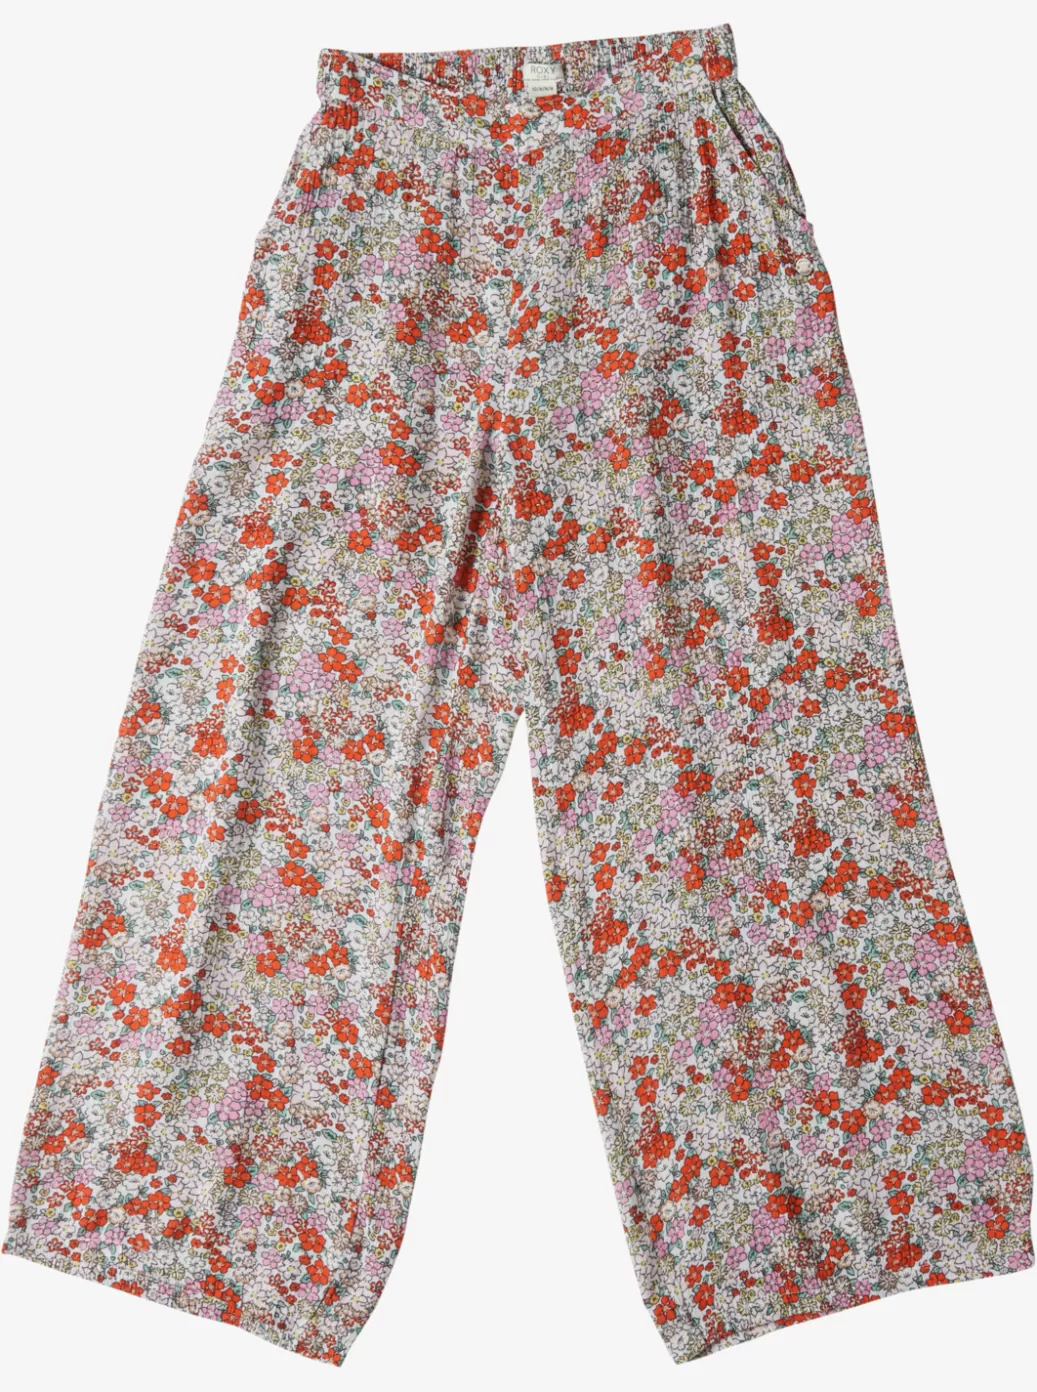 Jeans & Pants | KIDS ROXY Girls' 4-16 You Found Me Palazzo Pants Tiger Lily Autumn Ditsy